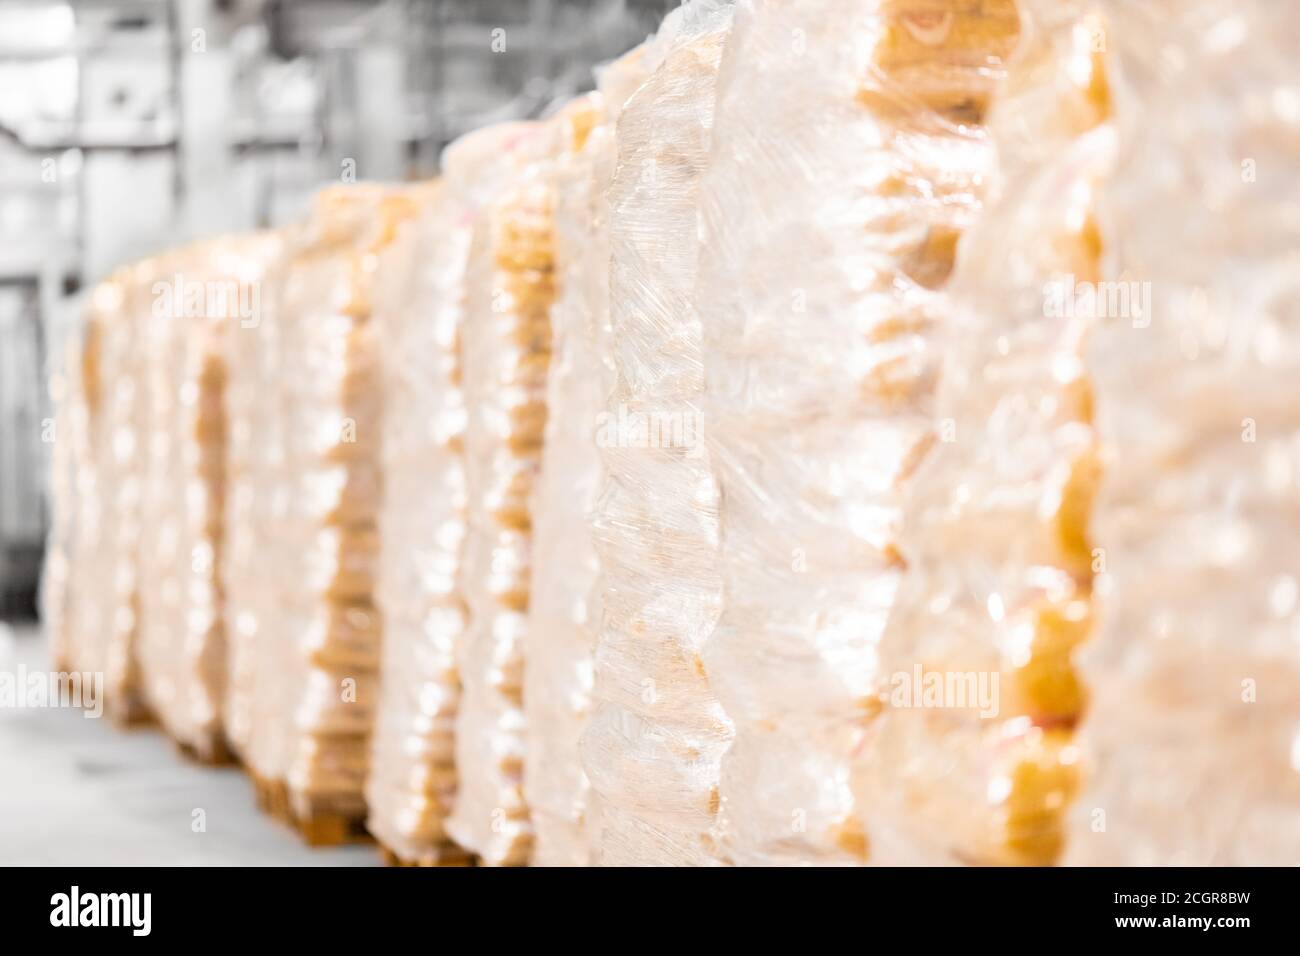 Pasta manufacturing automatic conveyor, drying and bagging for sale Stock Photo